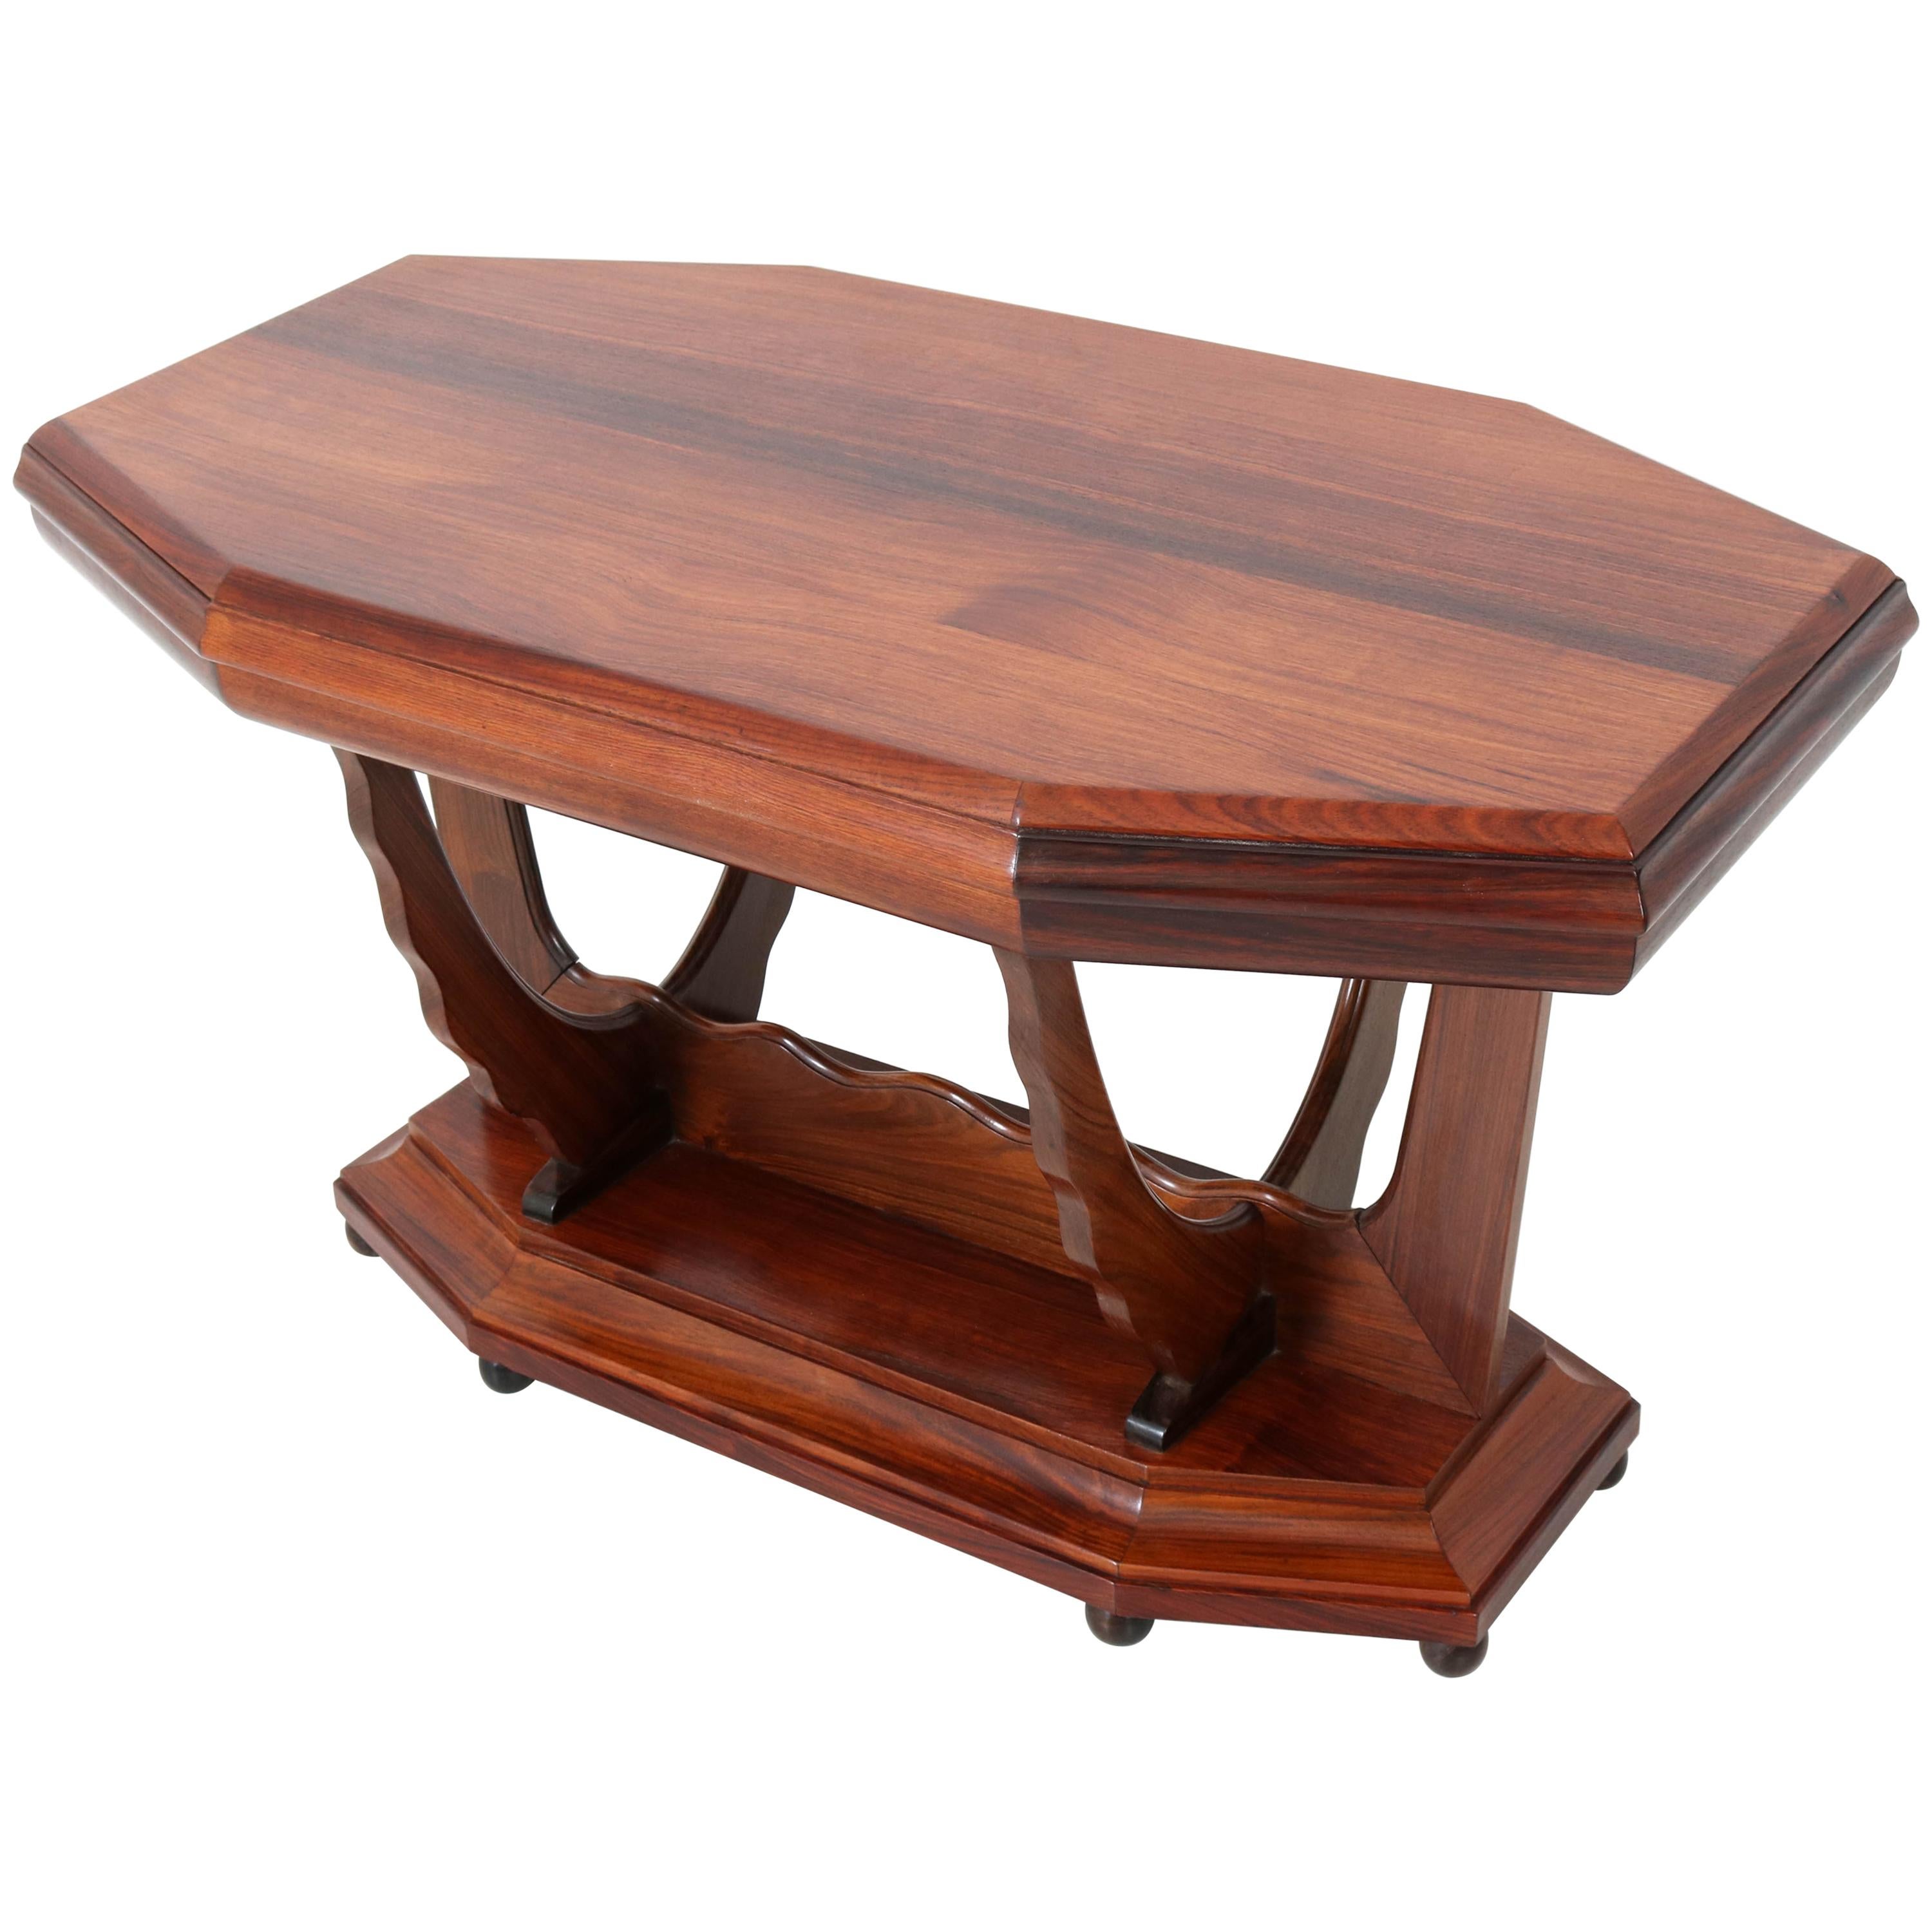 Rosewood Dutch Art Deco Amsterdam School Side Table by Max Coini, 1920s